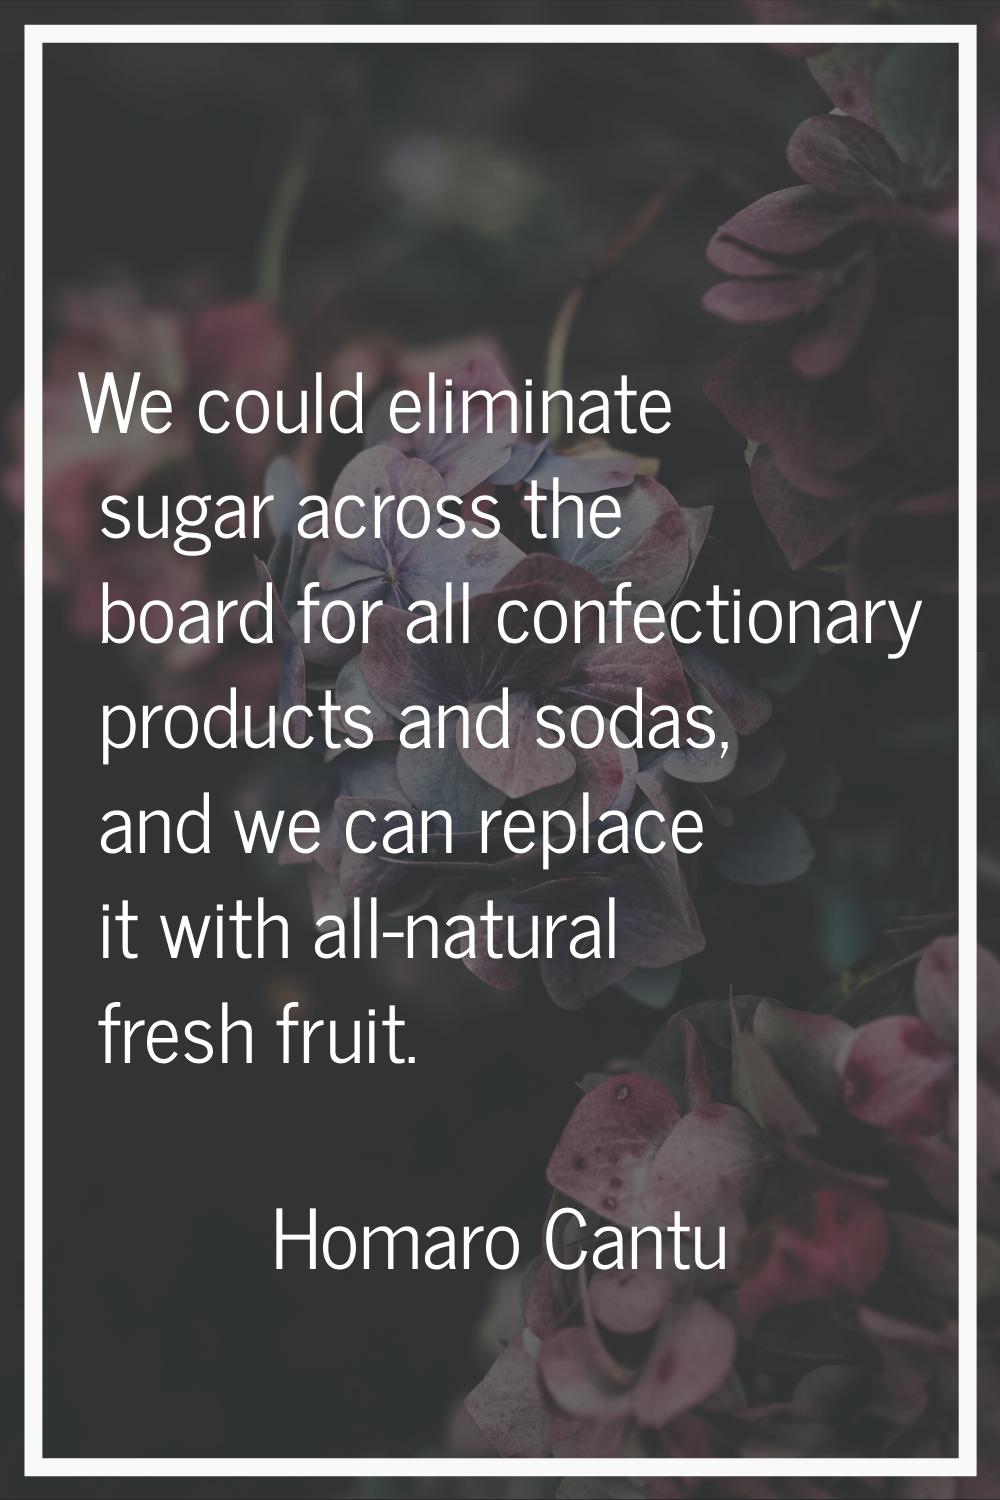 We could eliminate sugar across the board for all confectionary products and sodas, and we can repl